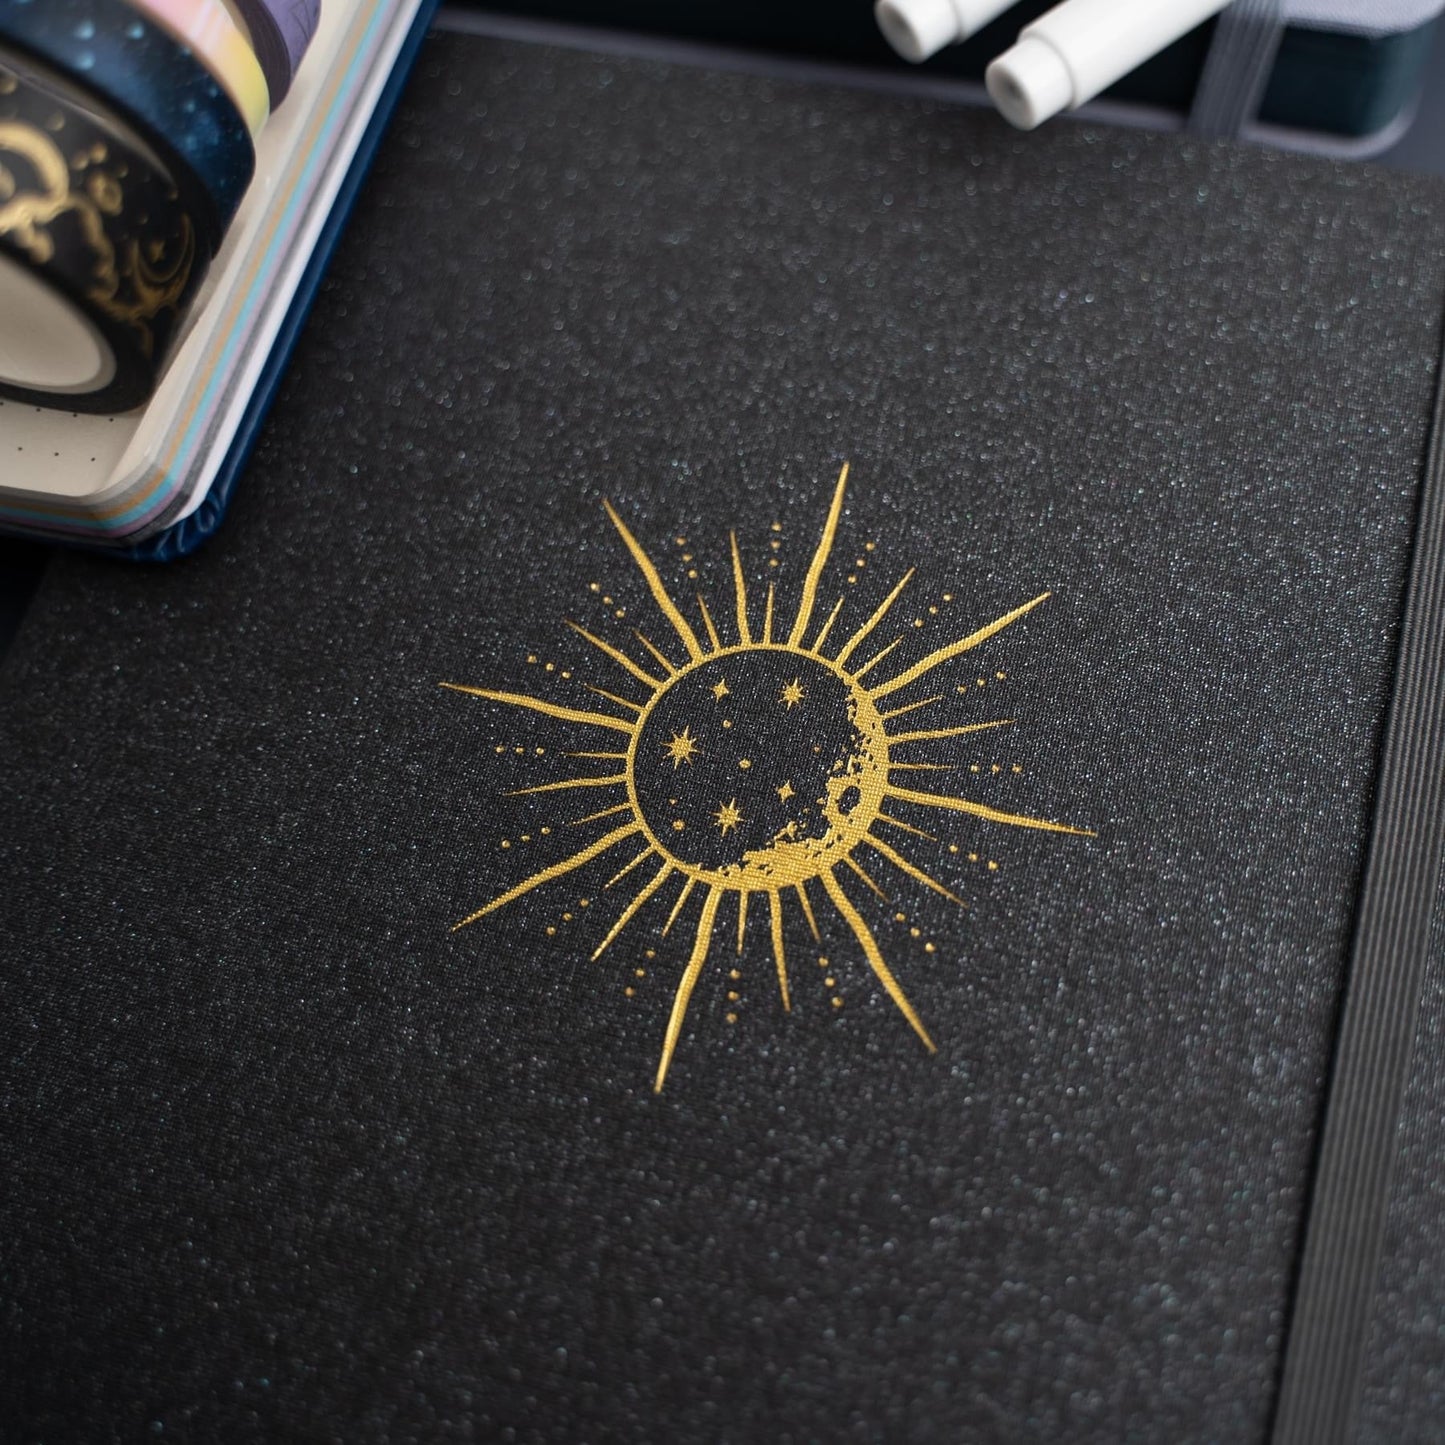 7x7 Sun and Moon Square Notebook - Celestial Wonders Subscription Box